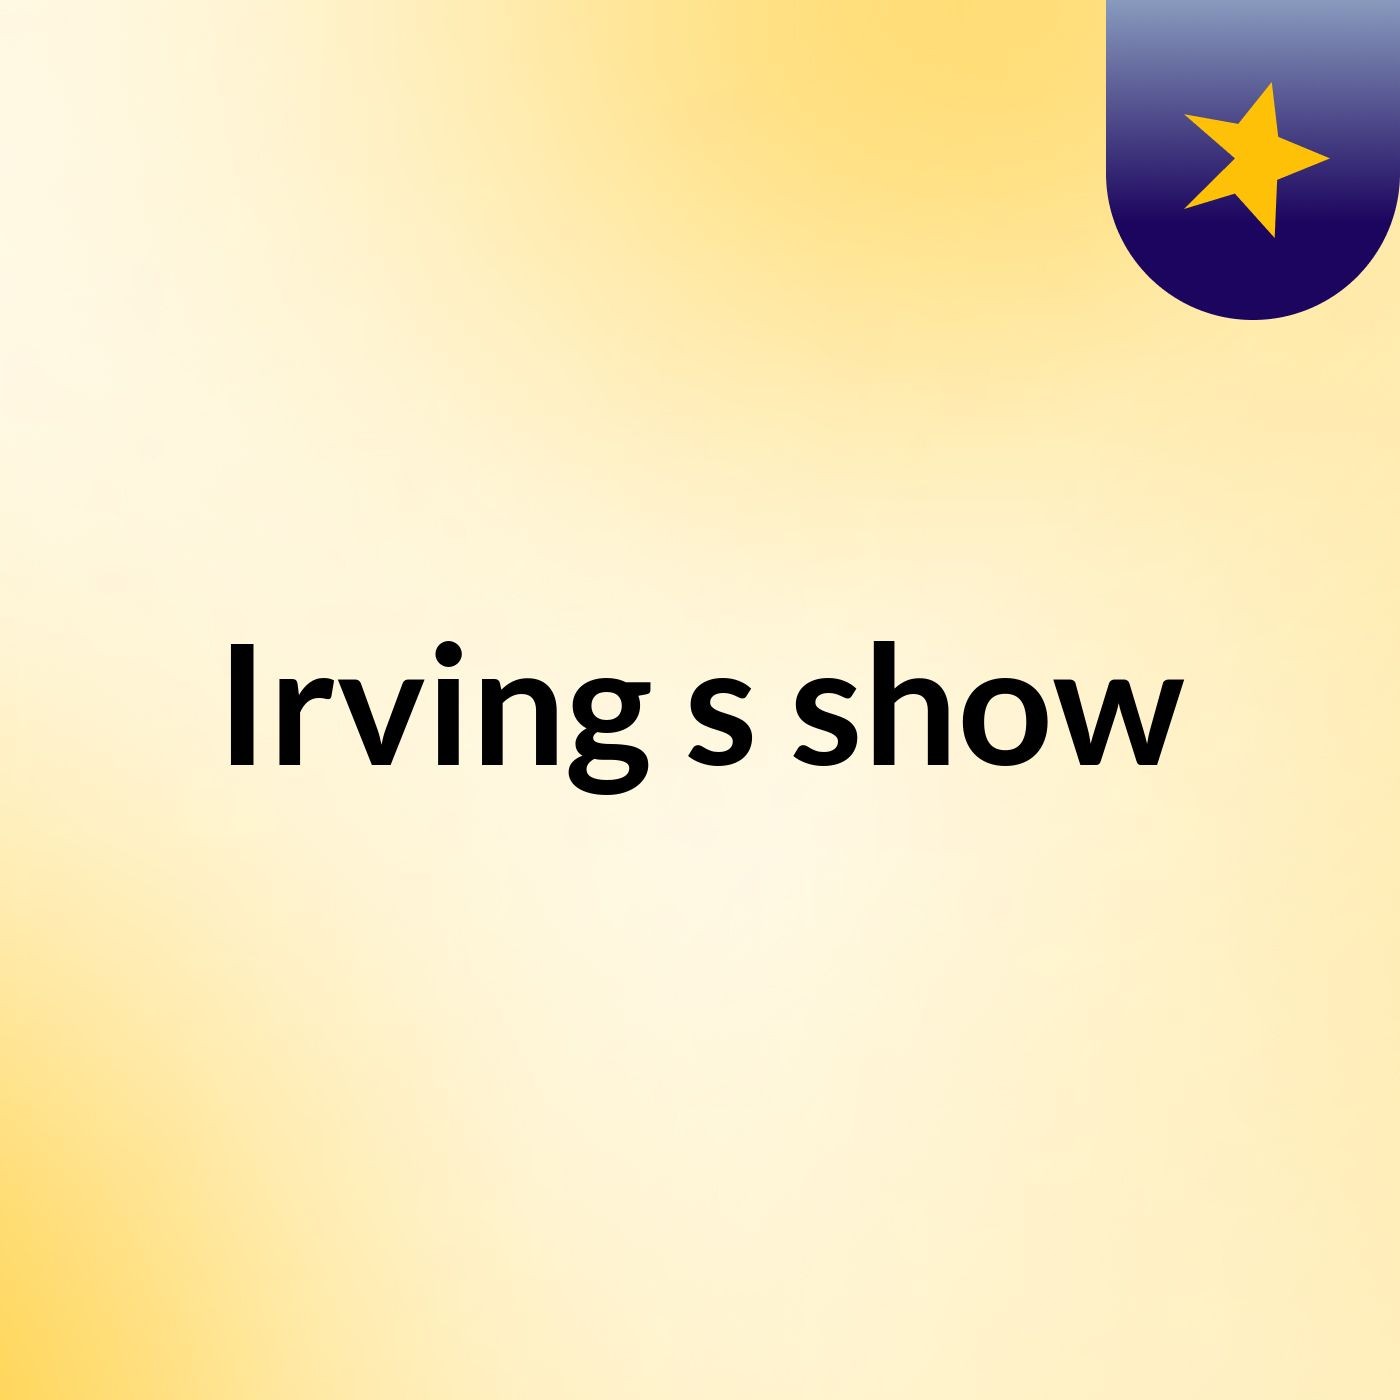 Irving's show